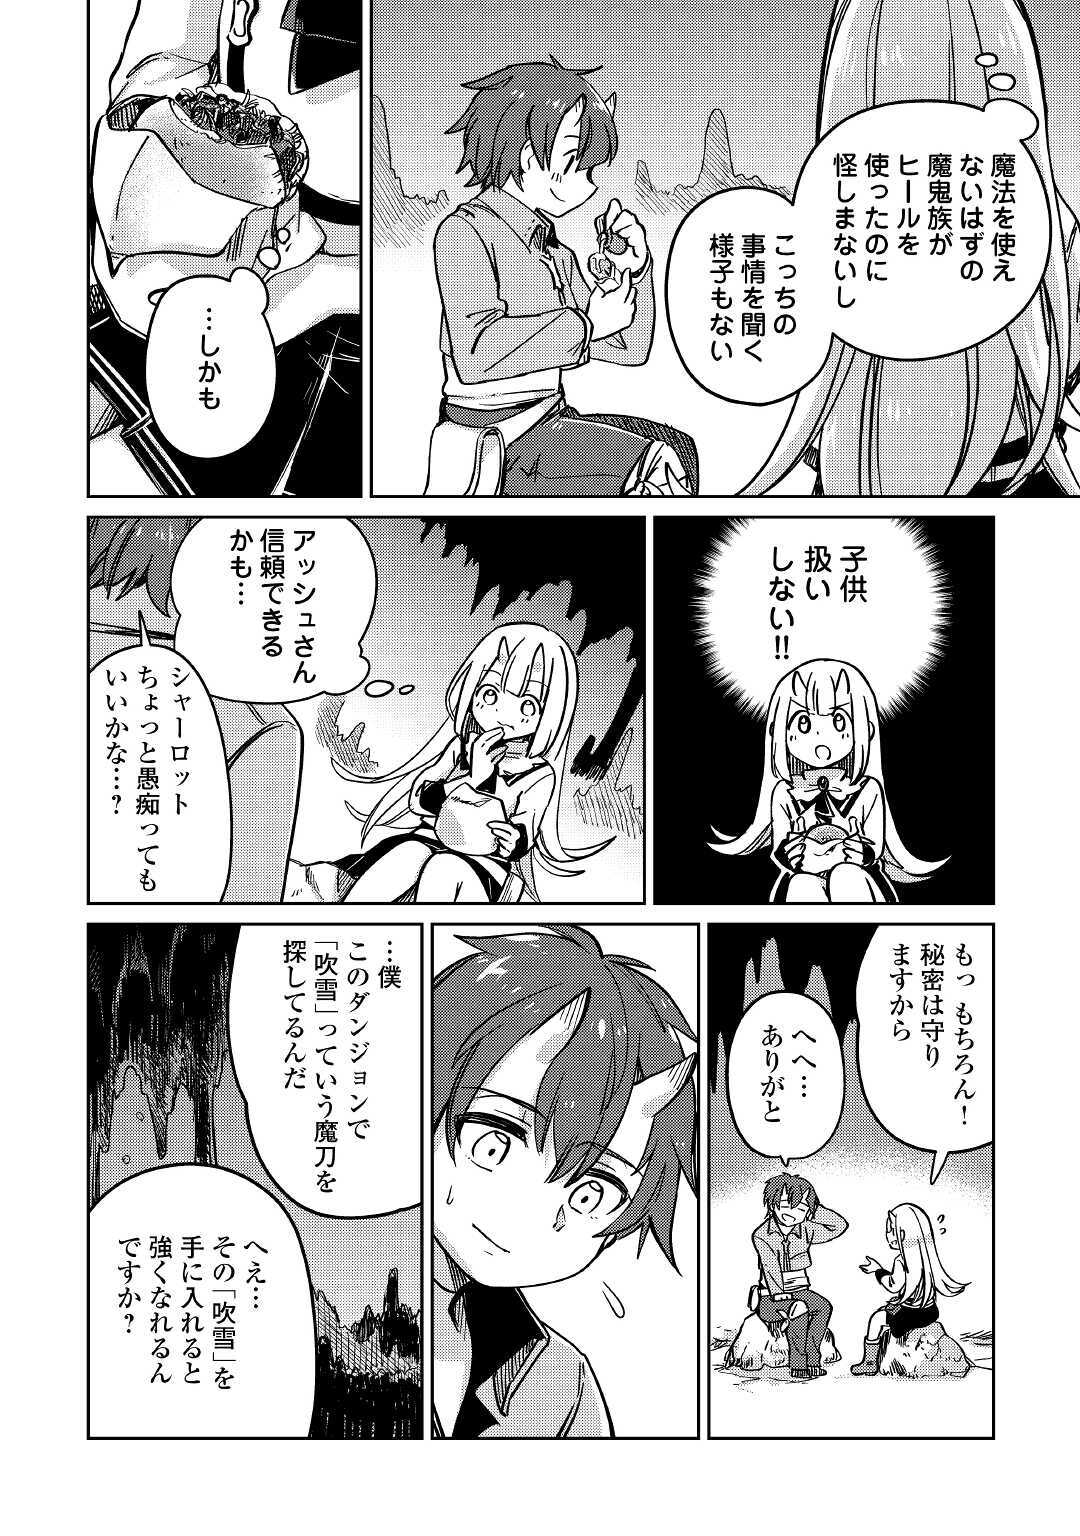 The Former Structural Researcher’s Story of Otherworldly Adventure 第28話 - Page 22